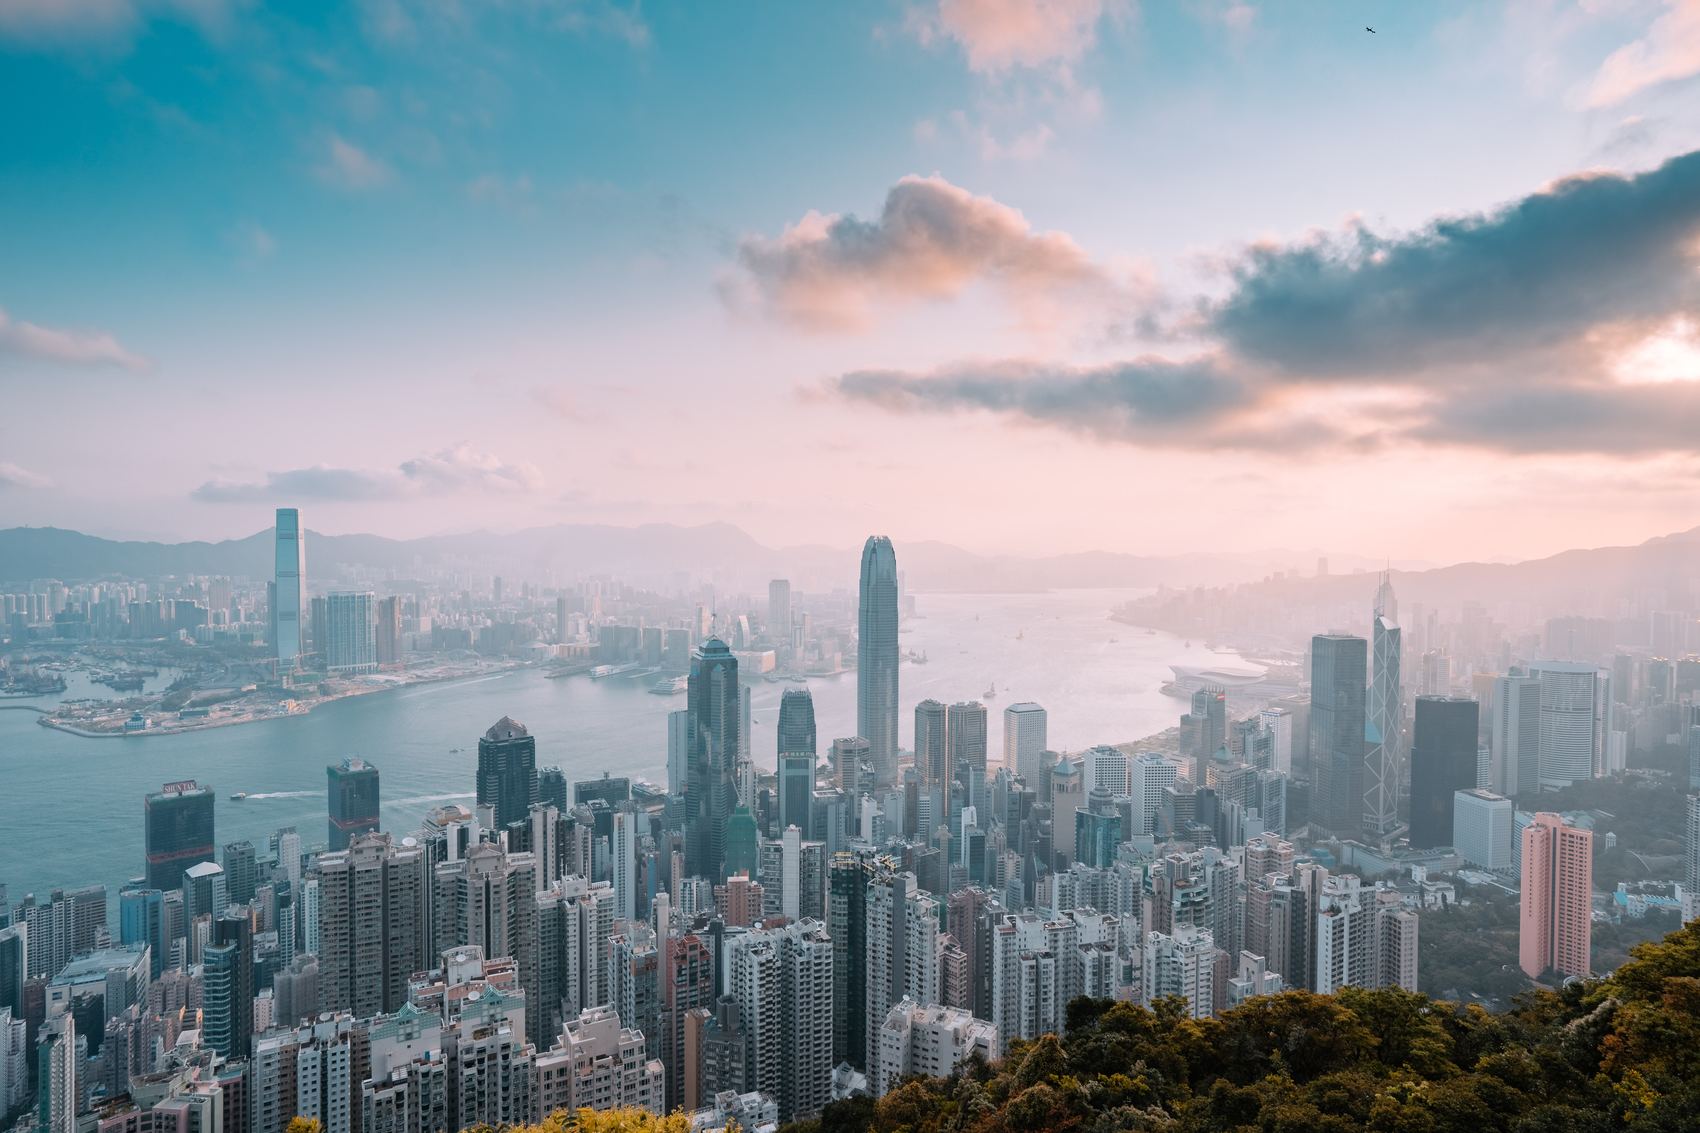 Hong Kong: The recession is likely to deepen in Q1 2020